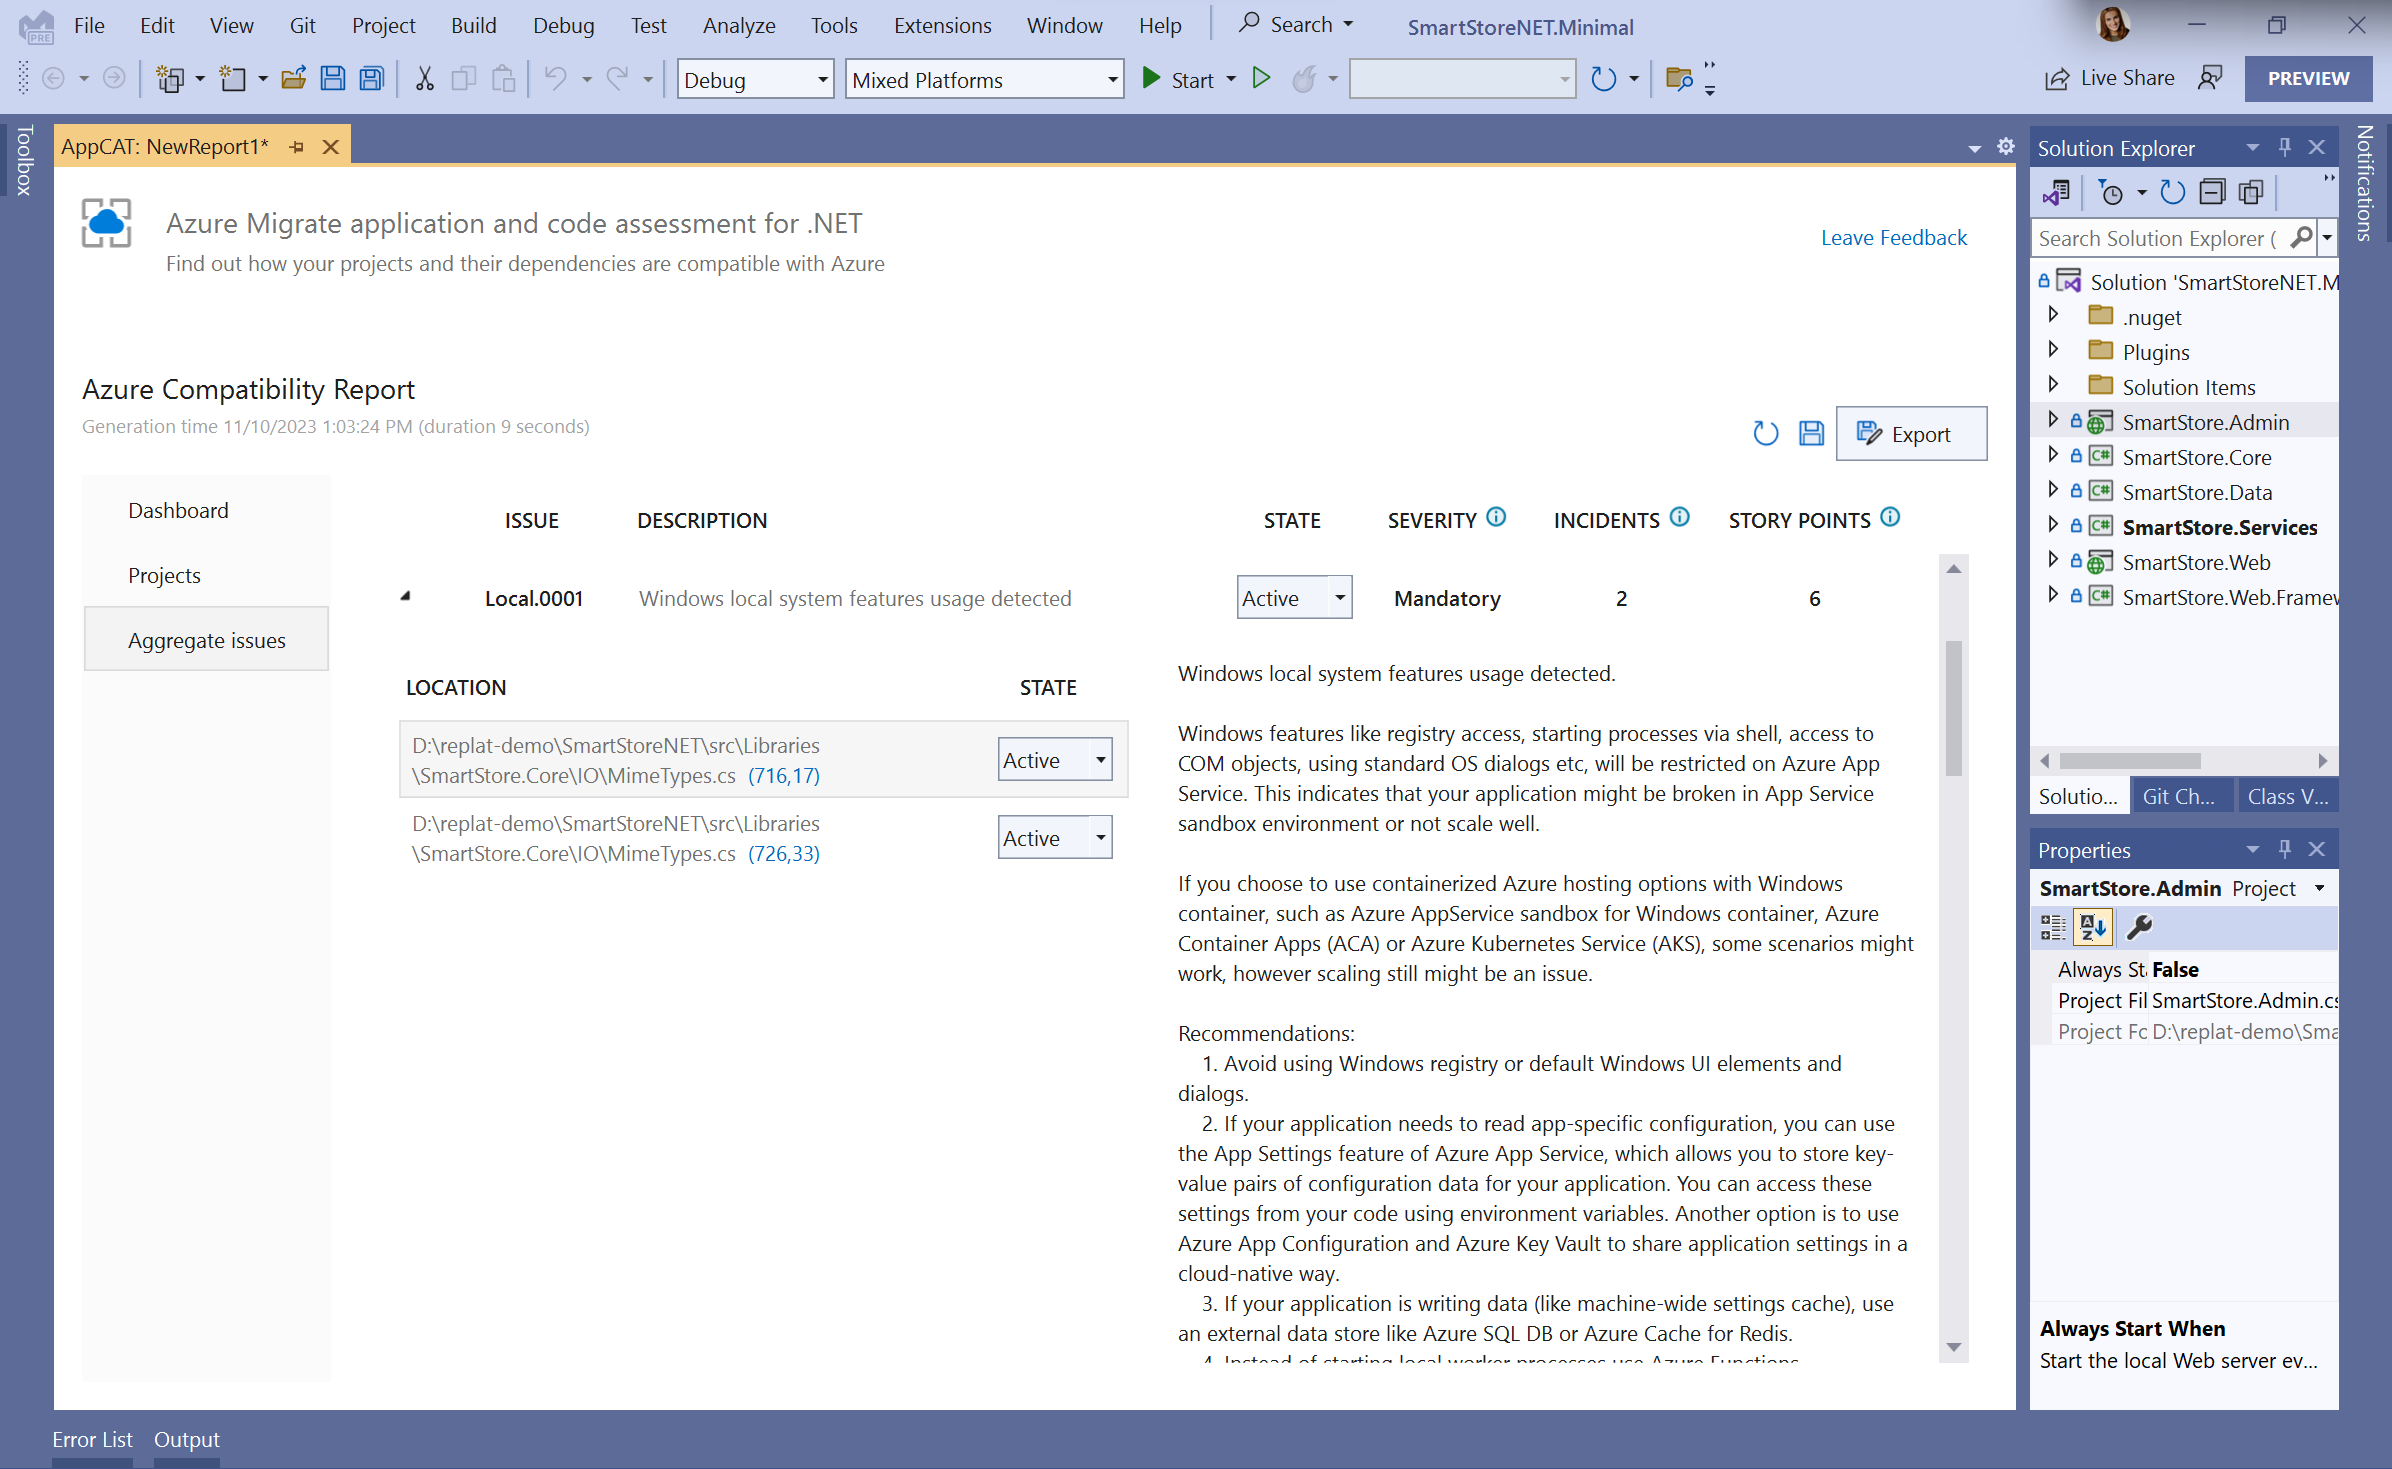 Screenshot of issues description in the Azure Migrate application and code assessment for .NET in Visual Studio